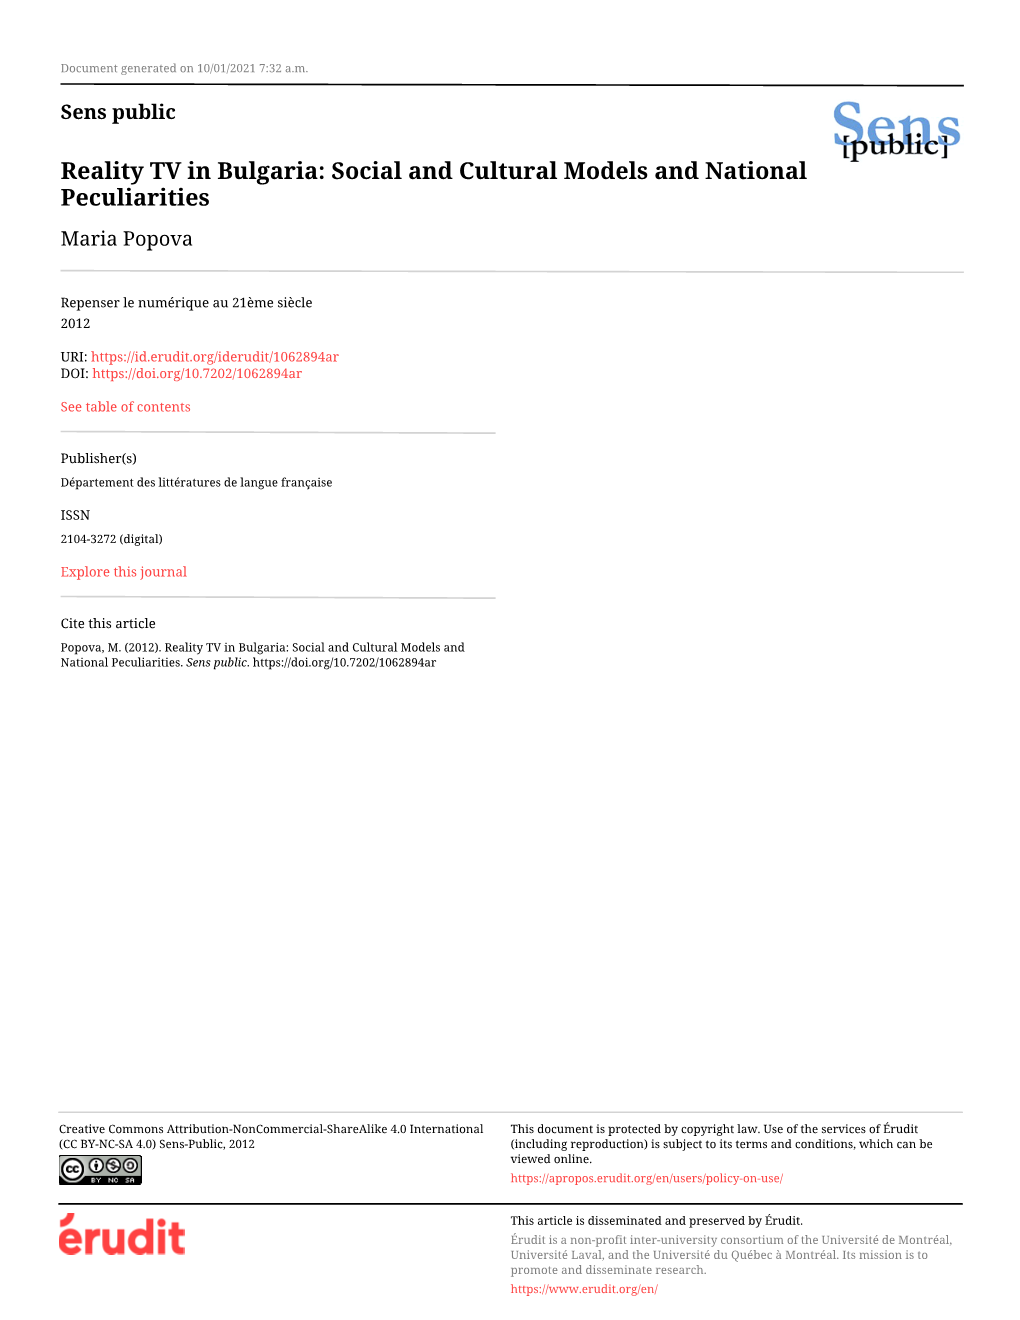 Reality TV in Bulgaria: Social and Cultural Models and National Peculiarities Maria Popova